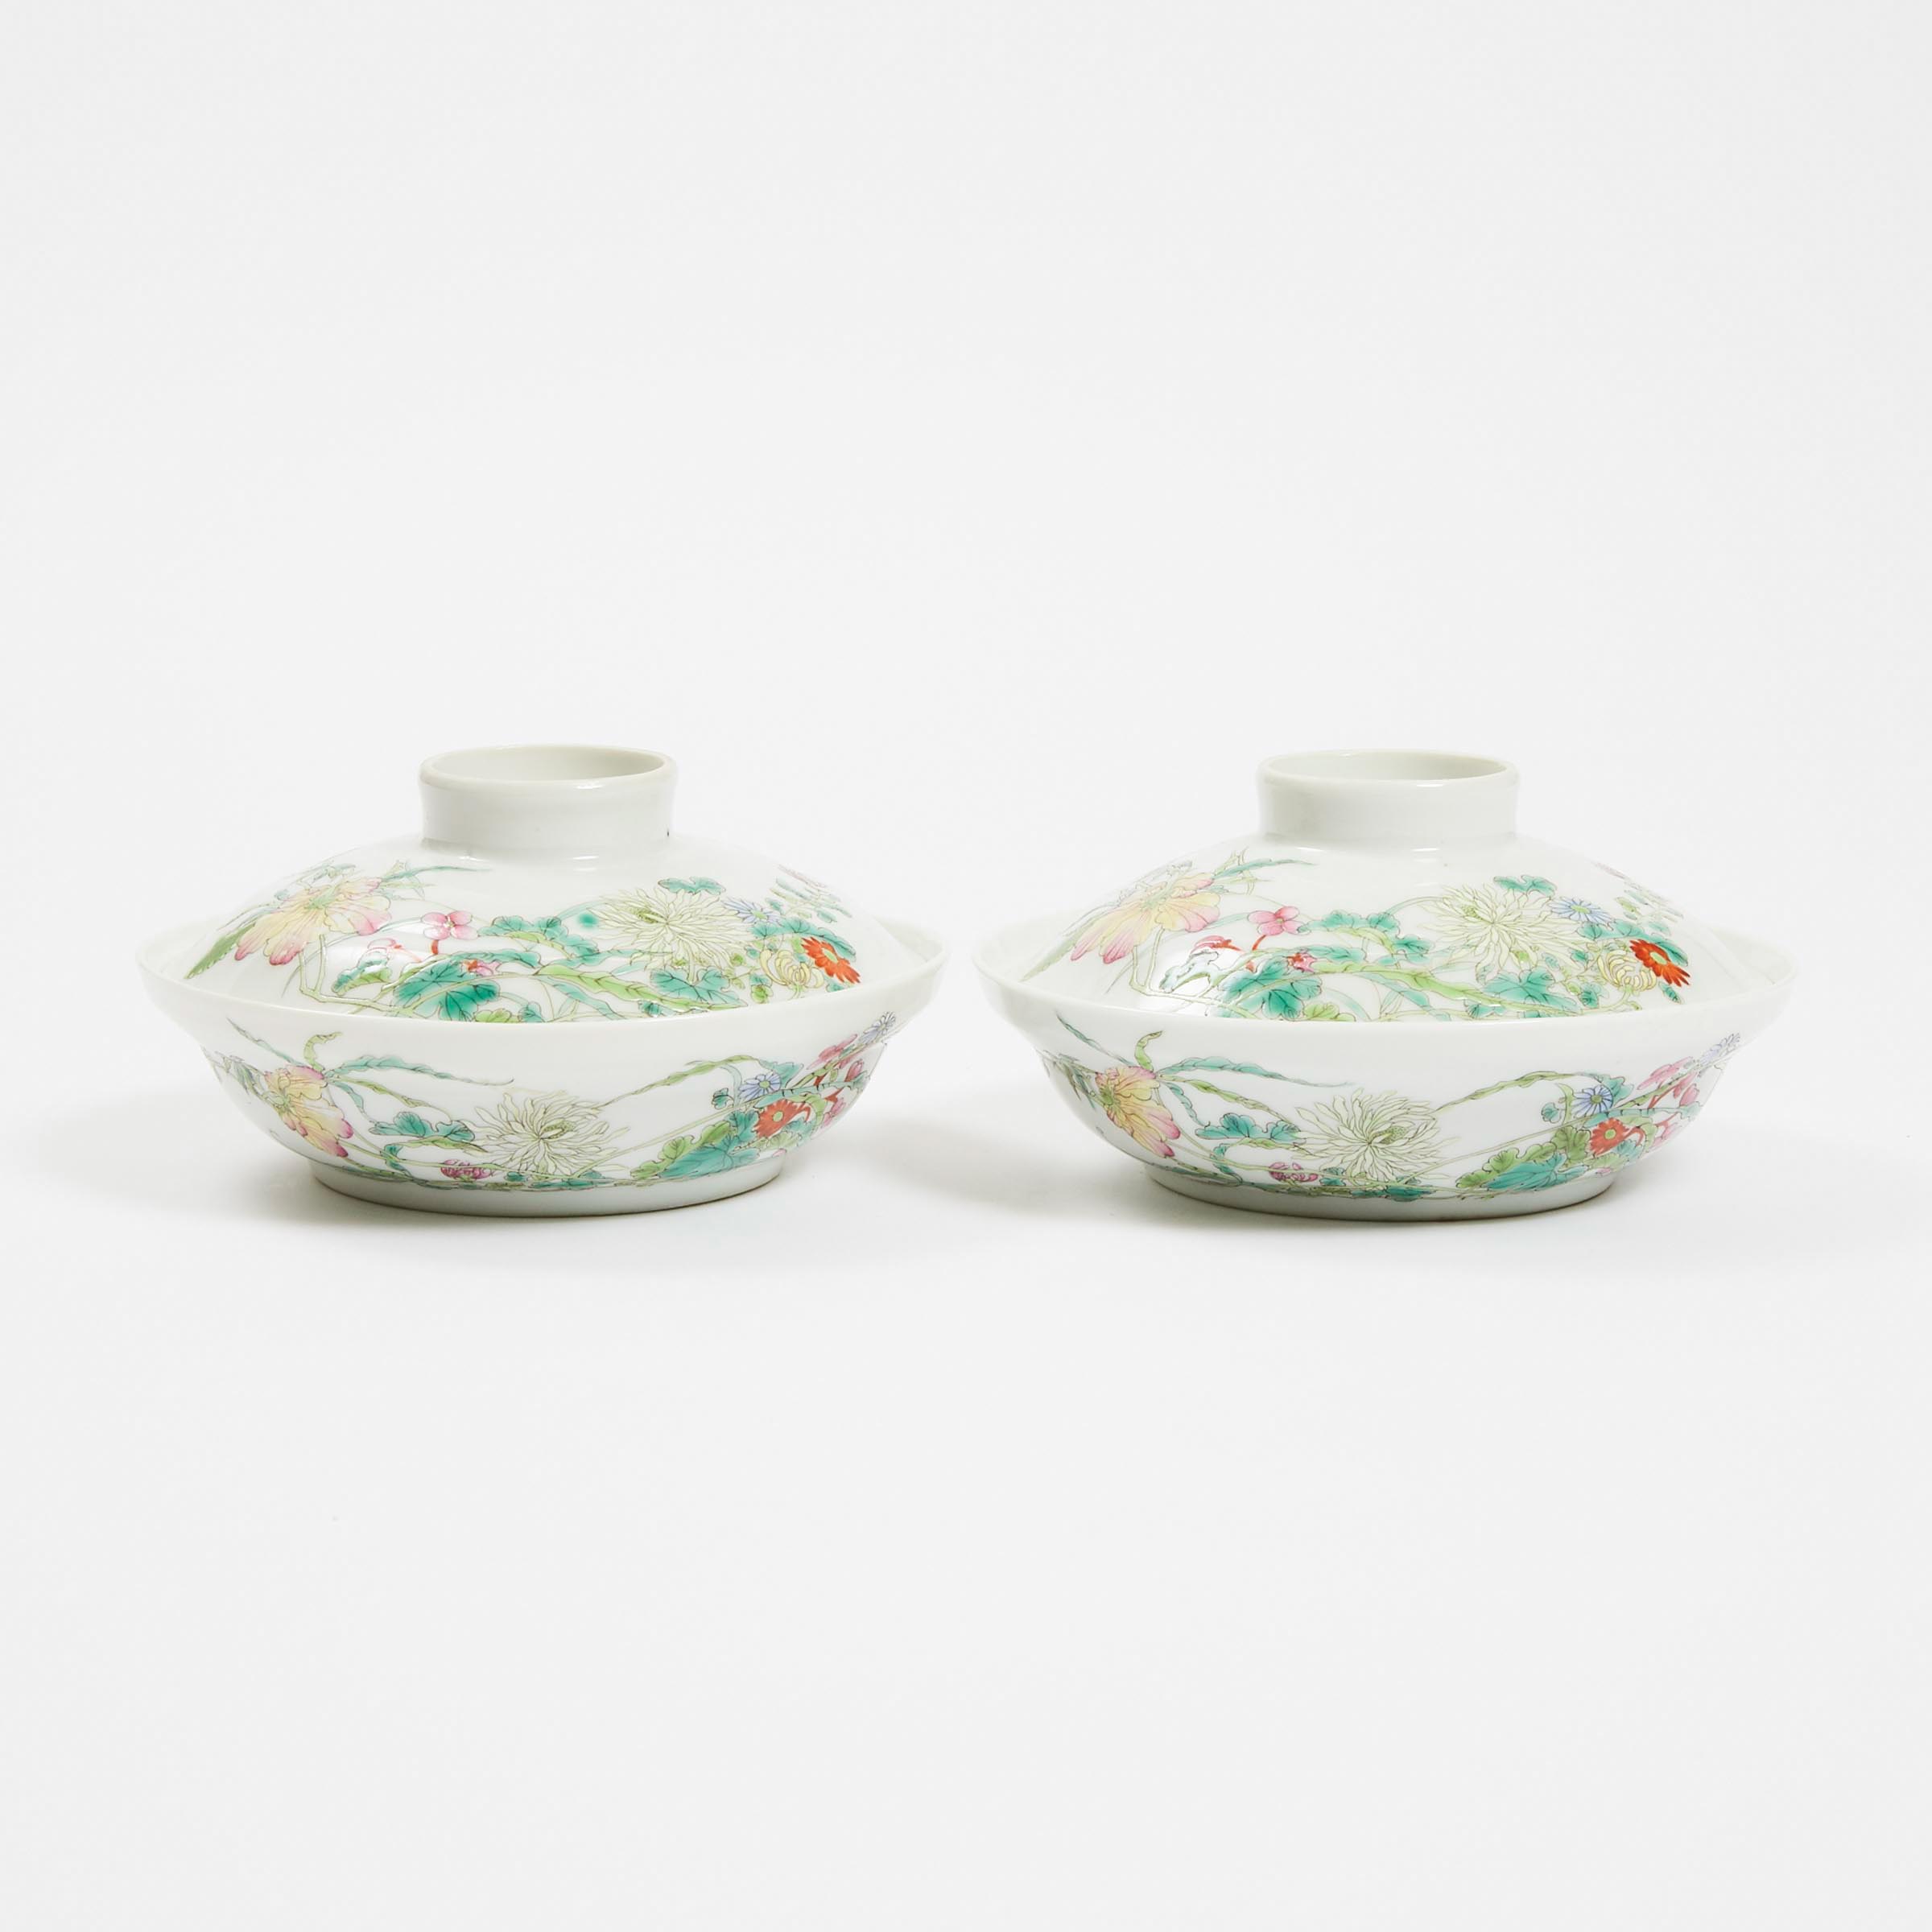 A Pair of Famille Rose Bowls and Covers,